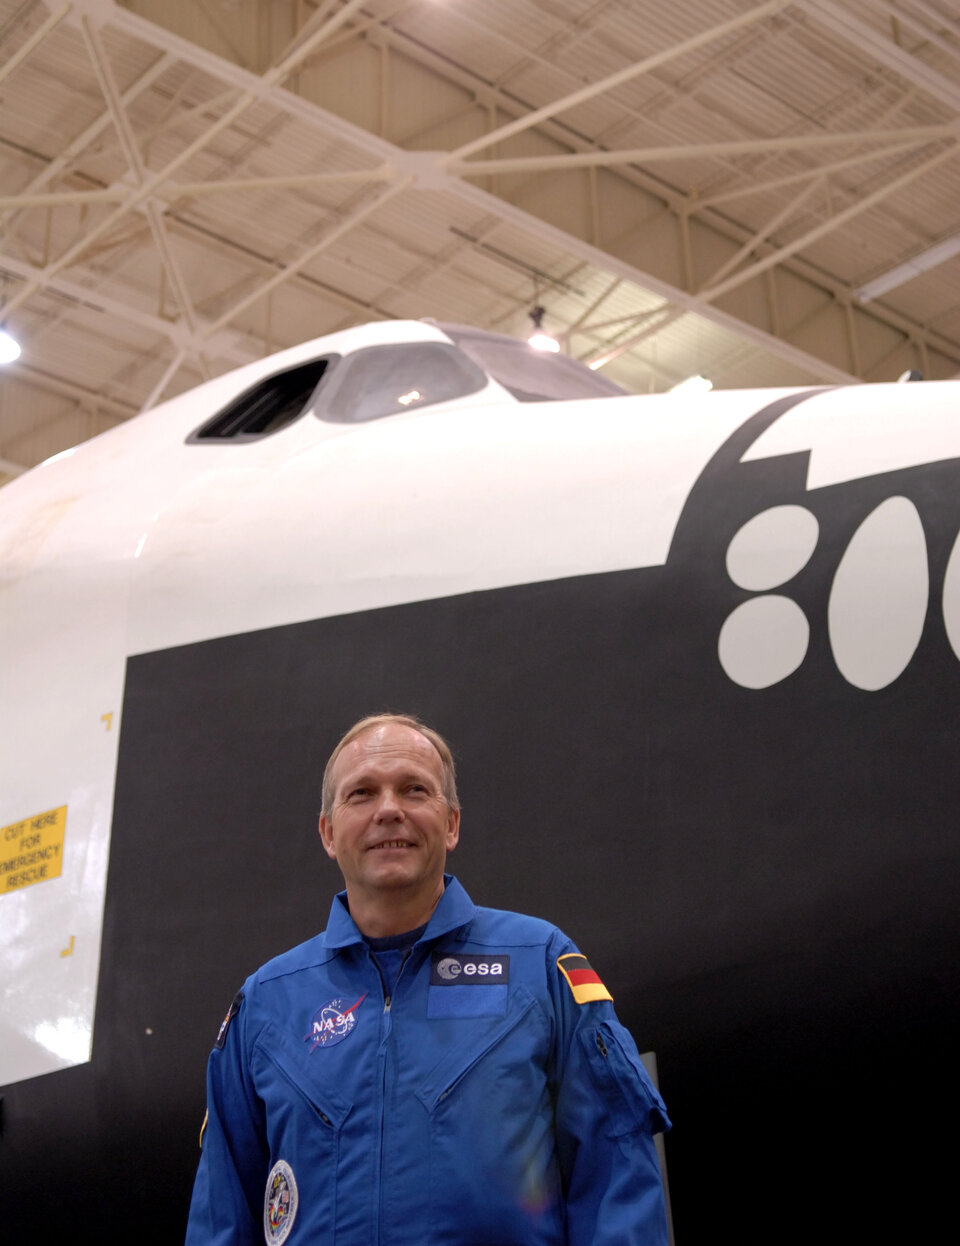 Eyharts will fly on the Space Shuttle together with ESA astronaut Hans Schlegel